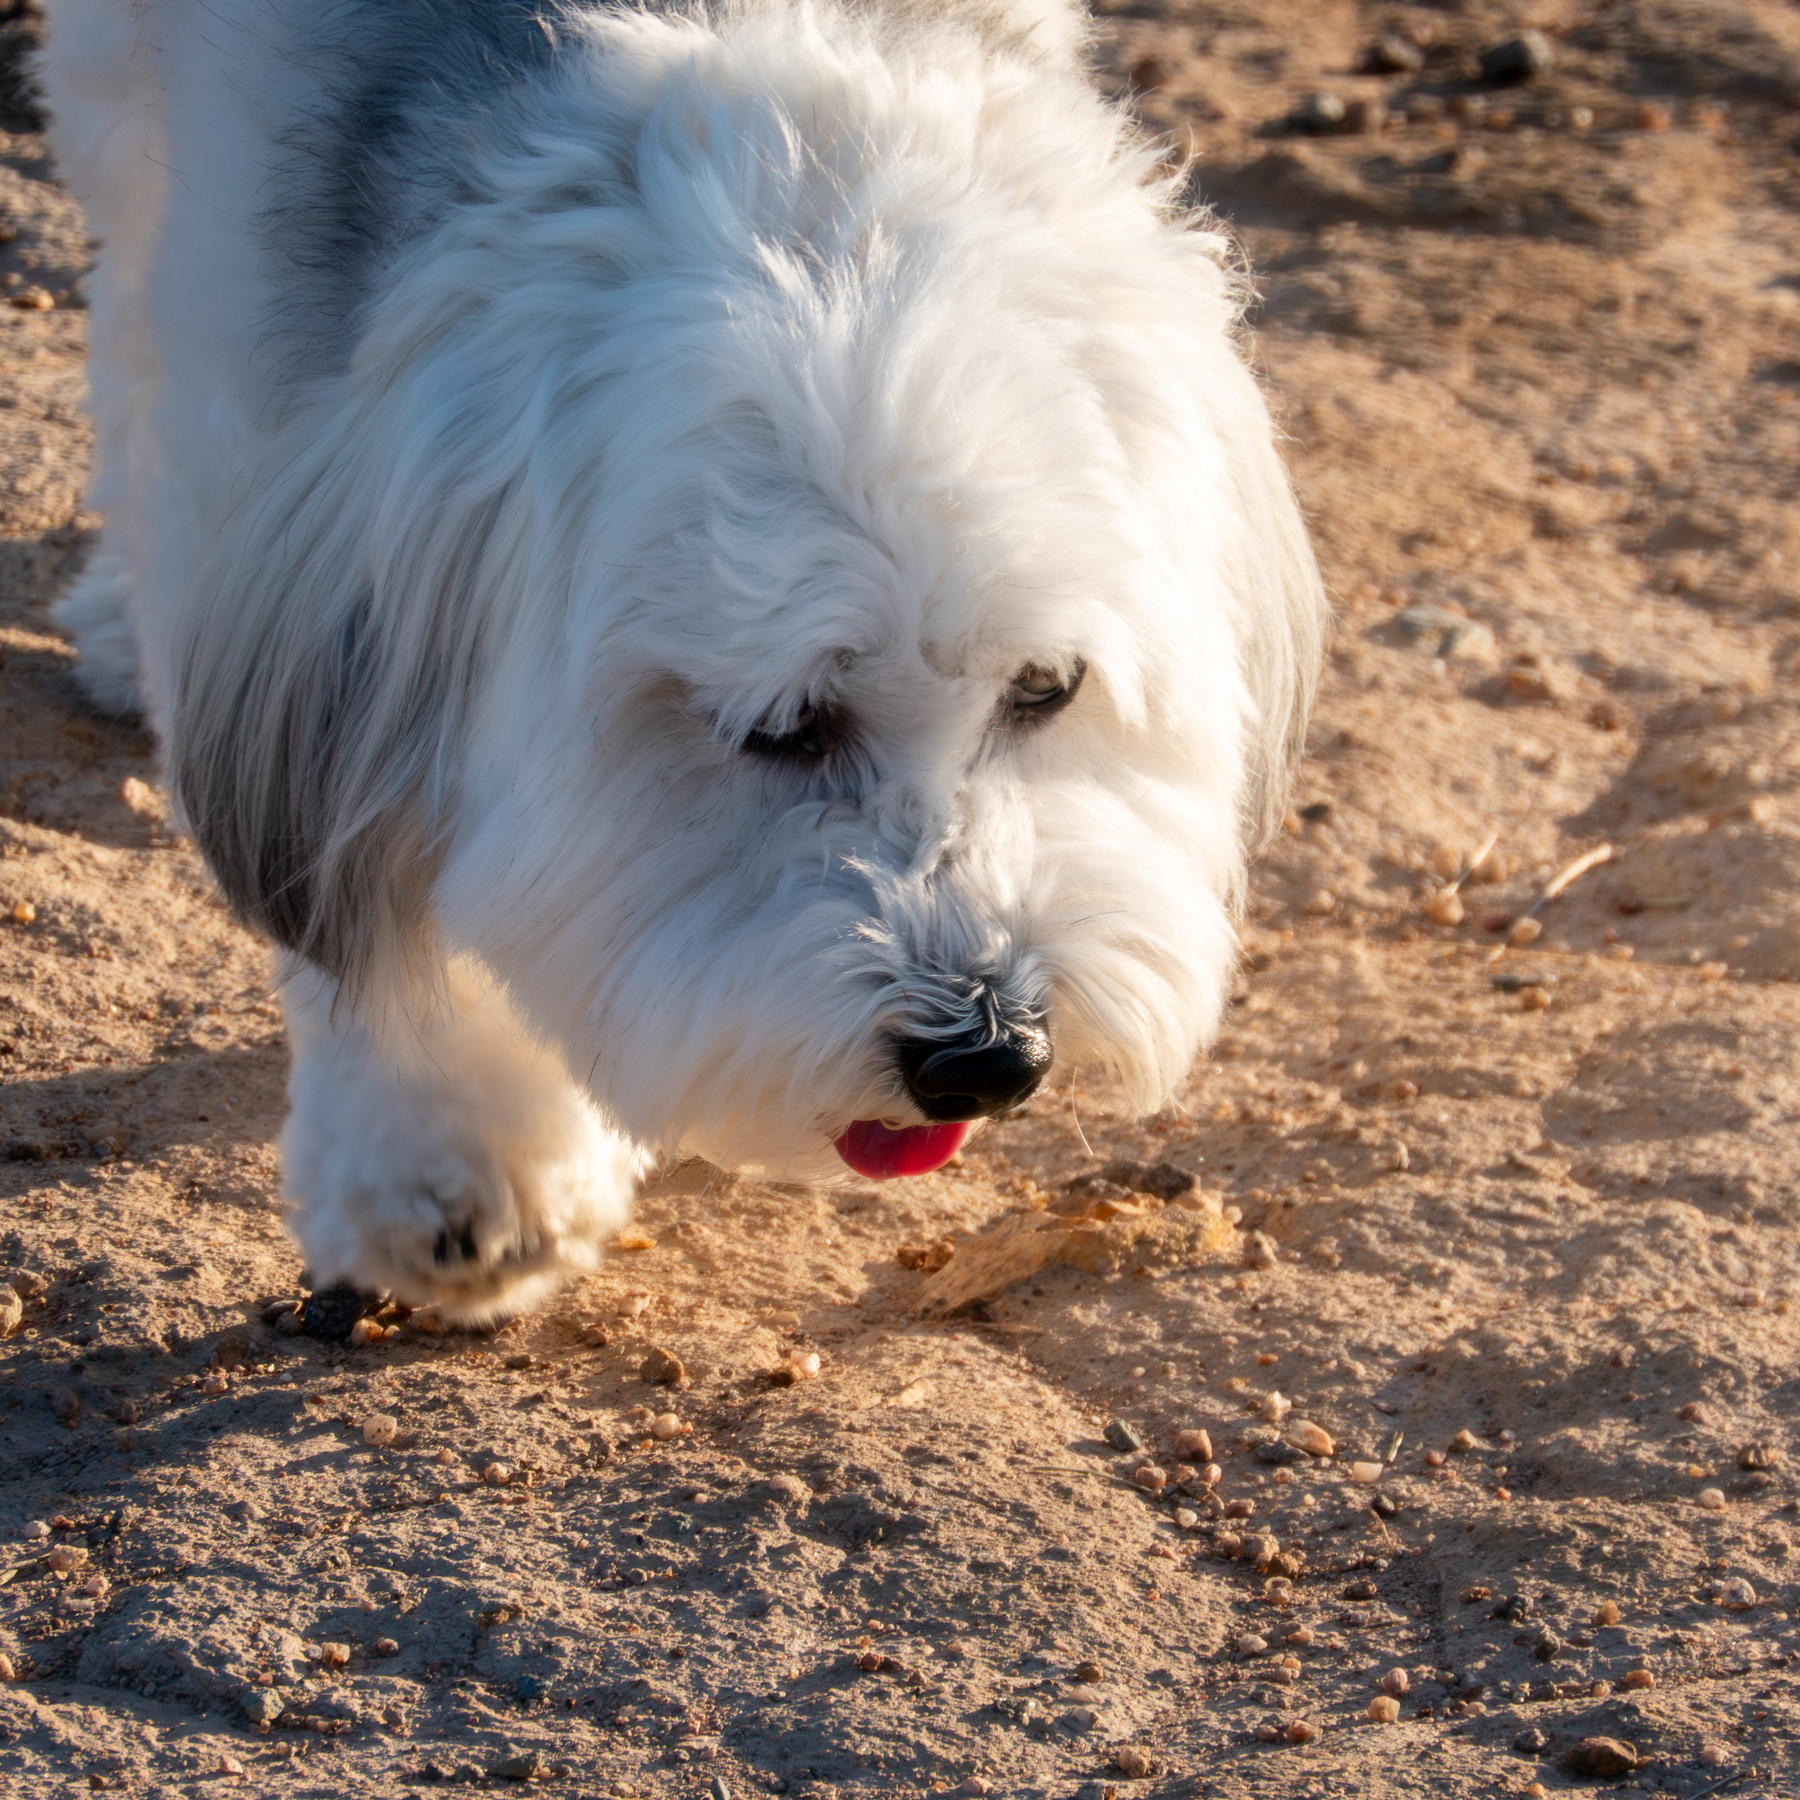 Trinket the white fluffy dog having a good sniff of the ground.